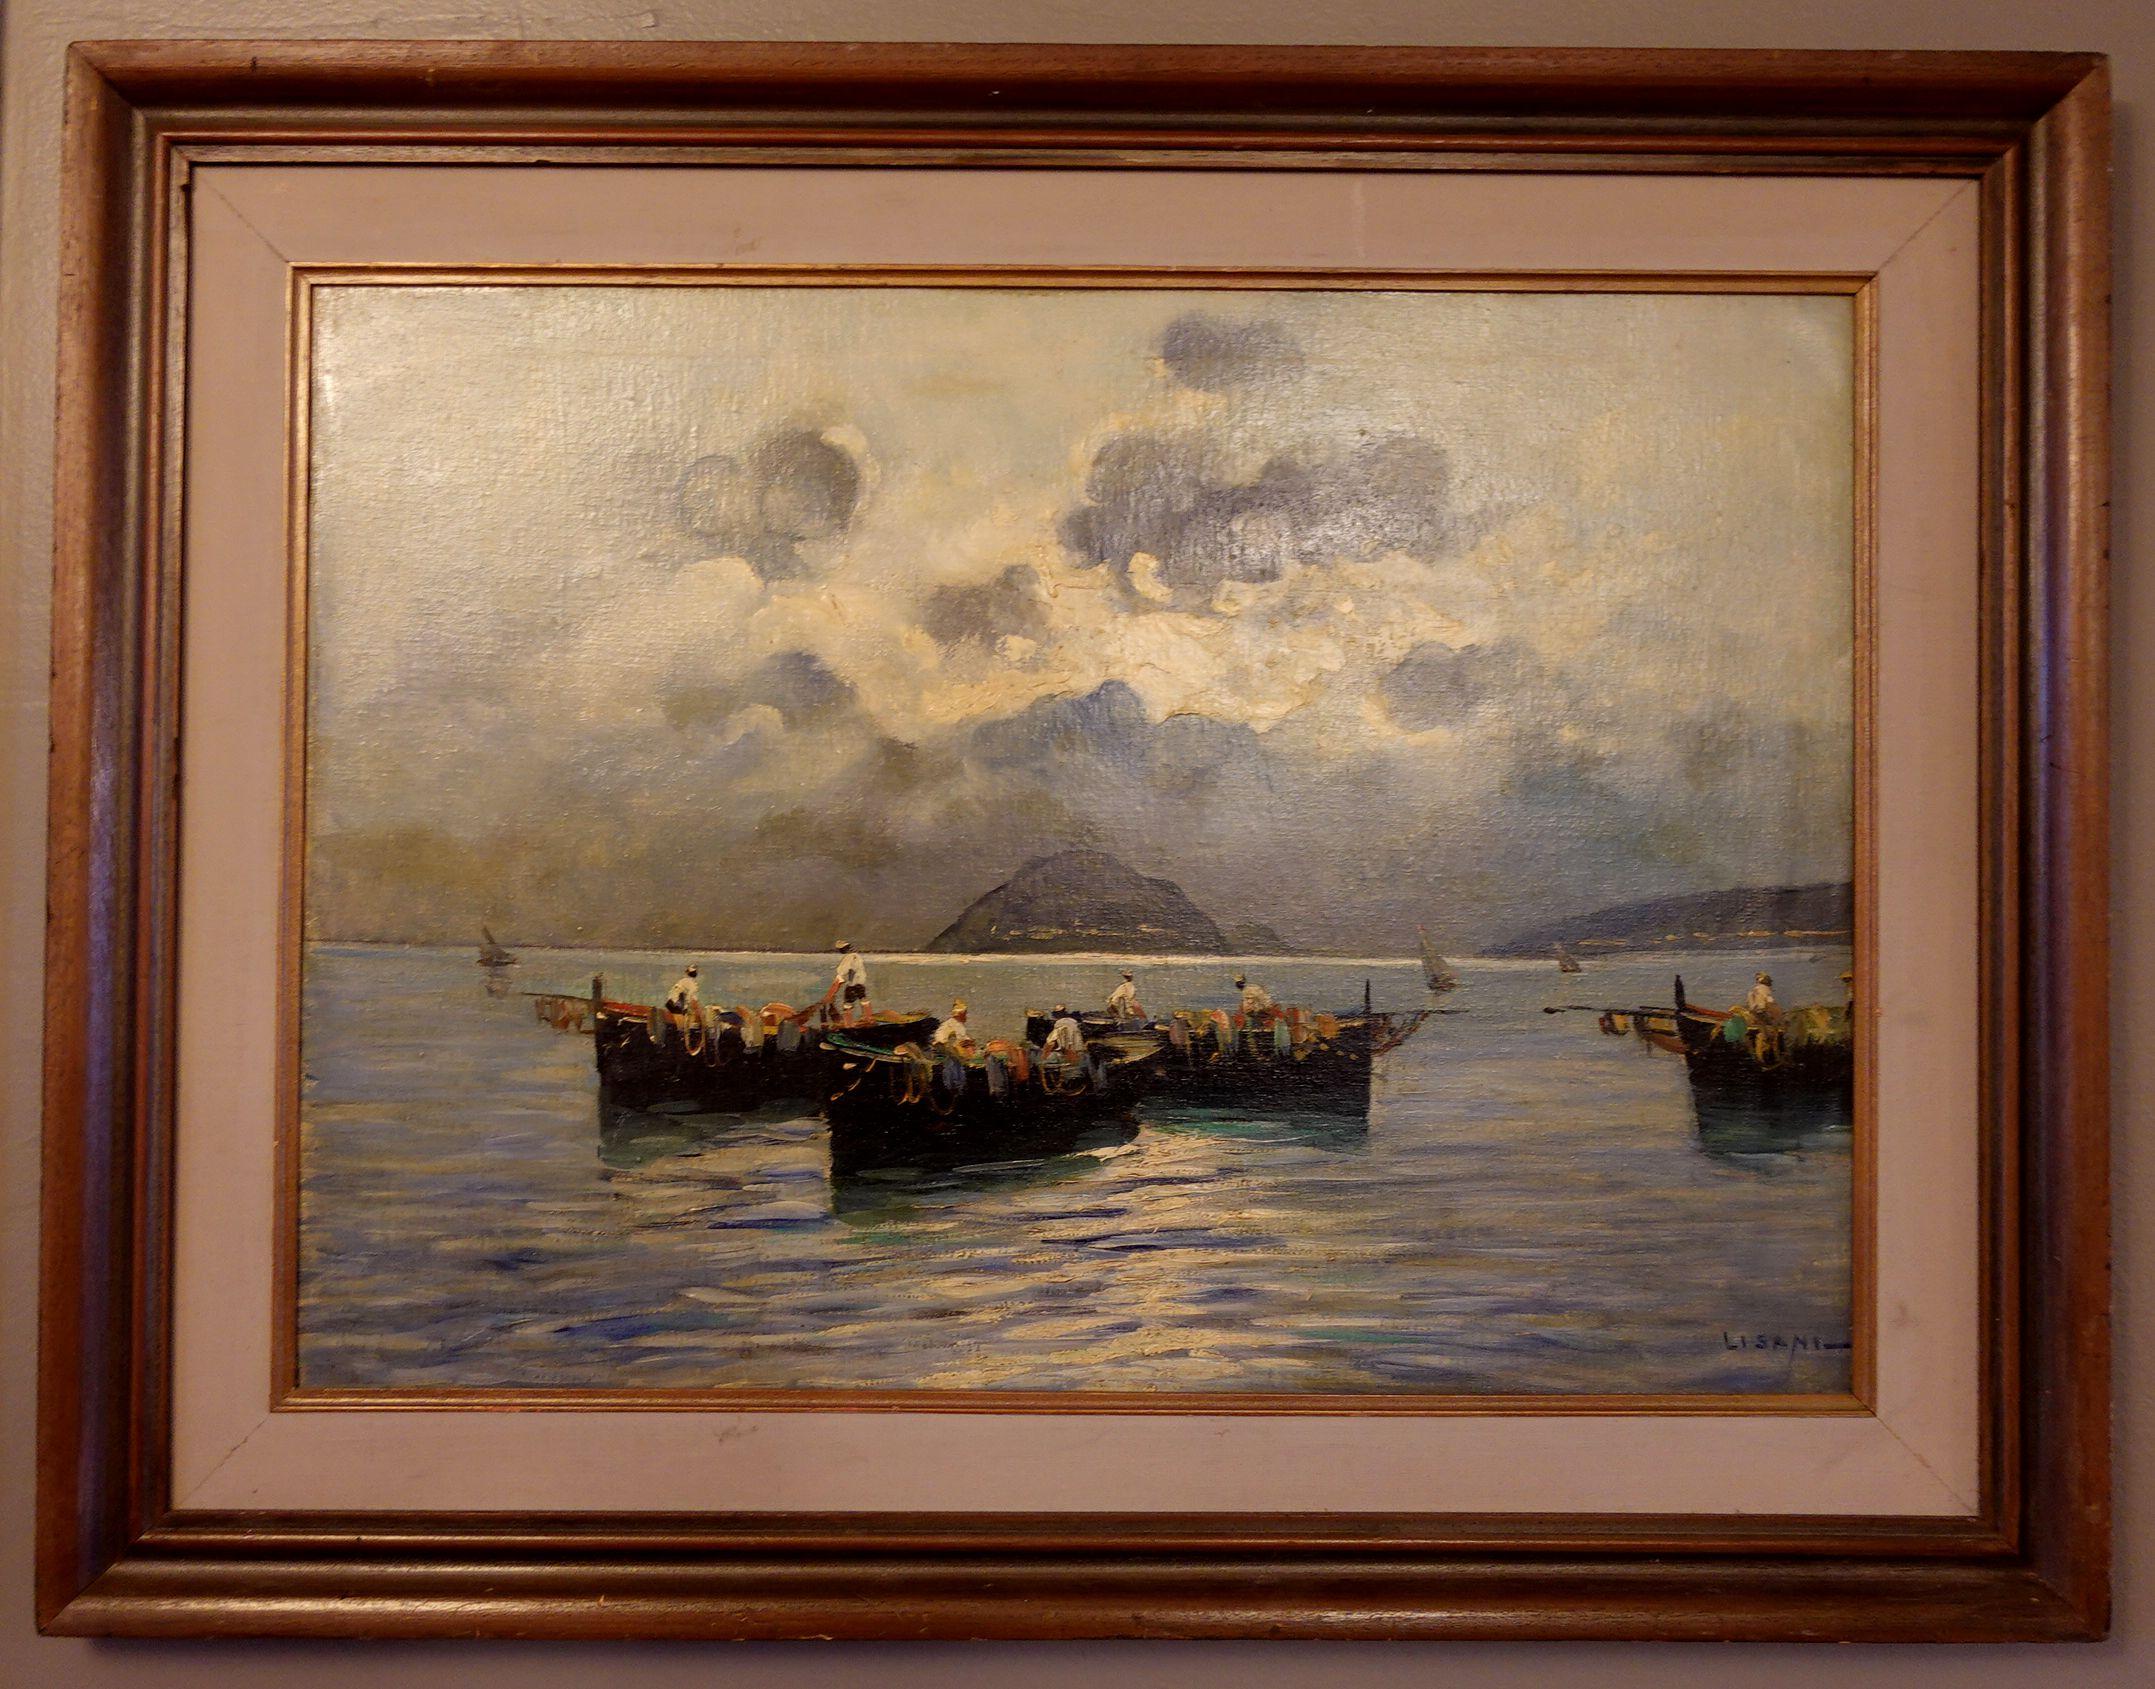 Lisani, a 20th century Italian artist, oil painting on board, fishing rowboats. Signed lower right. Framed. A certificate paper label is on the backside. Provenance: Nye and Company, Bloomfield, NJ, United States, July 21, 2021, lot 173. Lisani is a